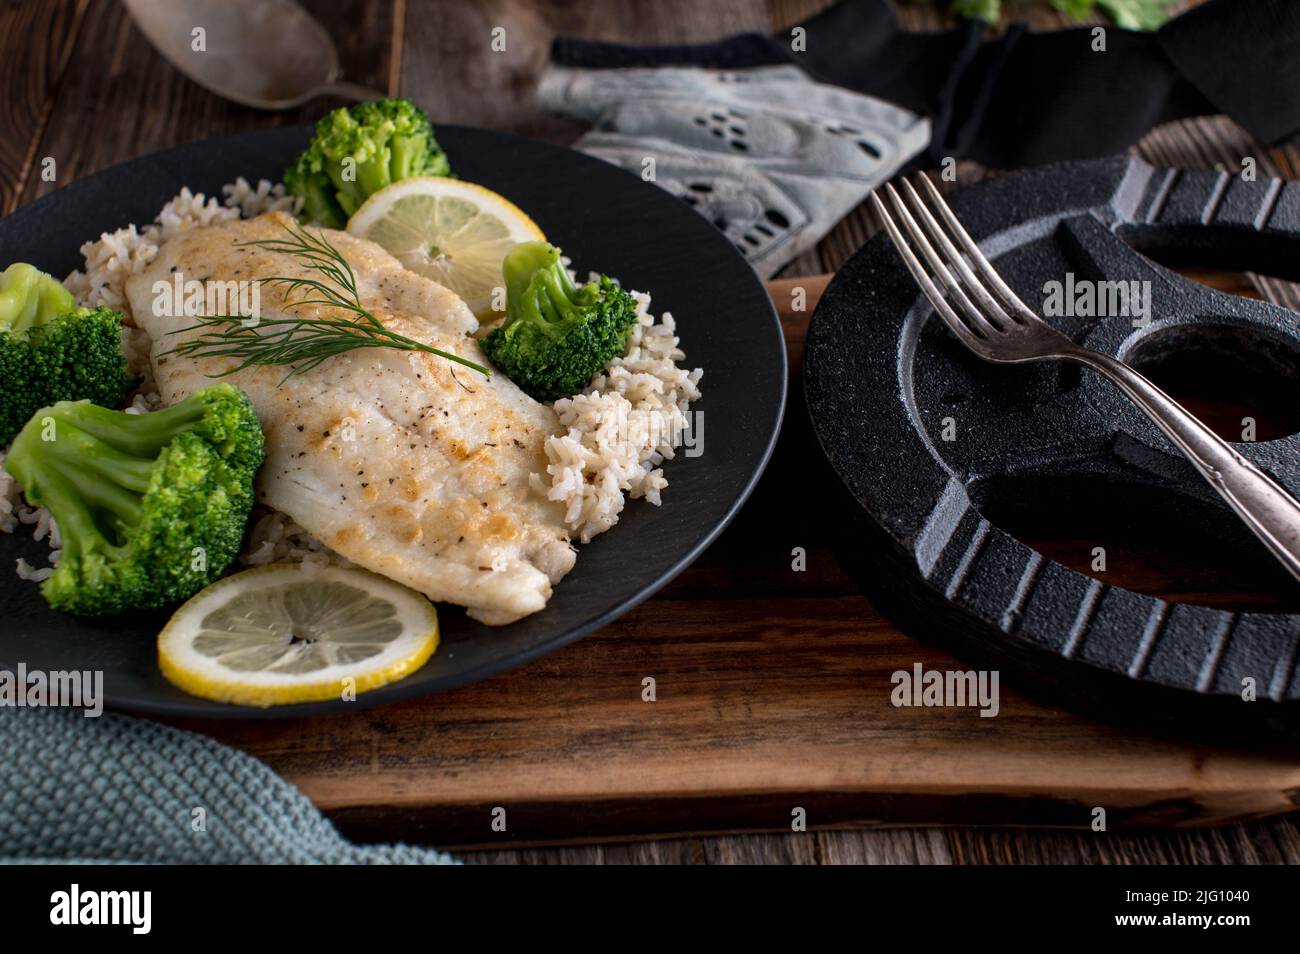 Muscle building meal with seared fish fillet, brown rice and broccoli. Served on a dark plate with dumbbell on wooden table Stock Photo